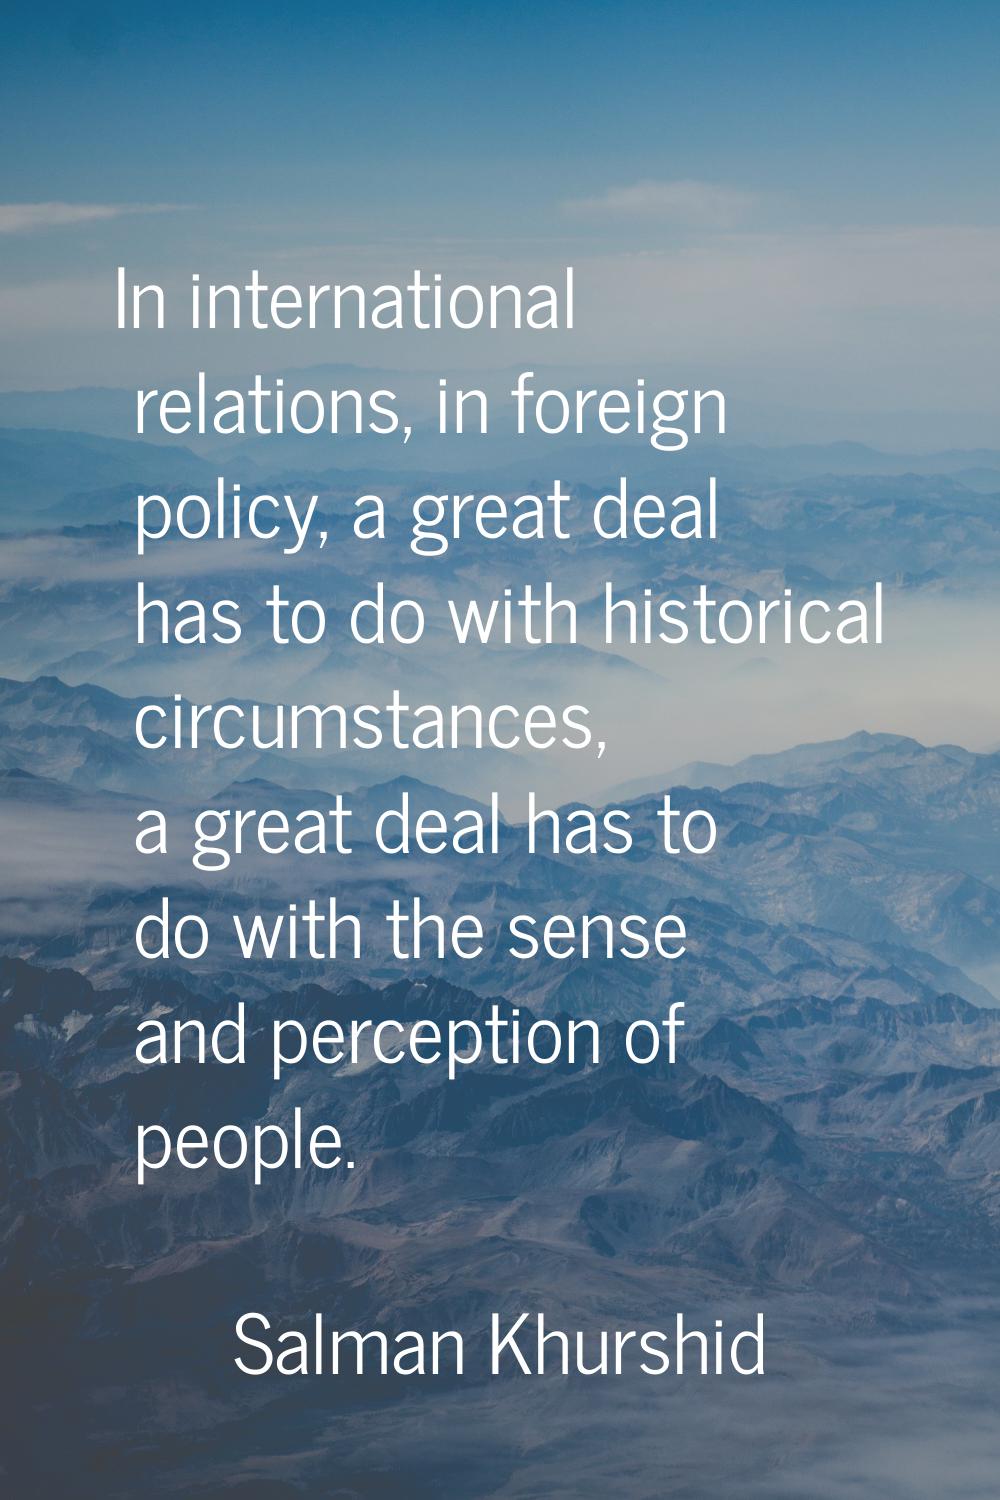 In international relations, in foreign policy, a great deal has to do with historical circumstances